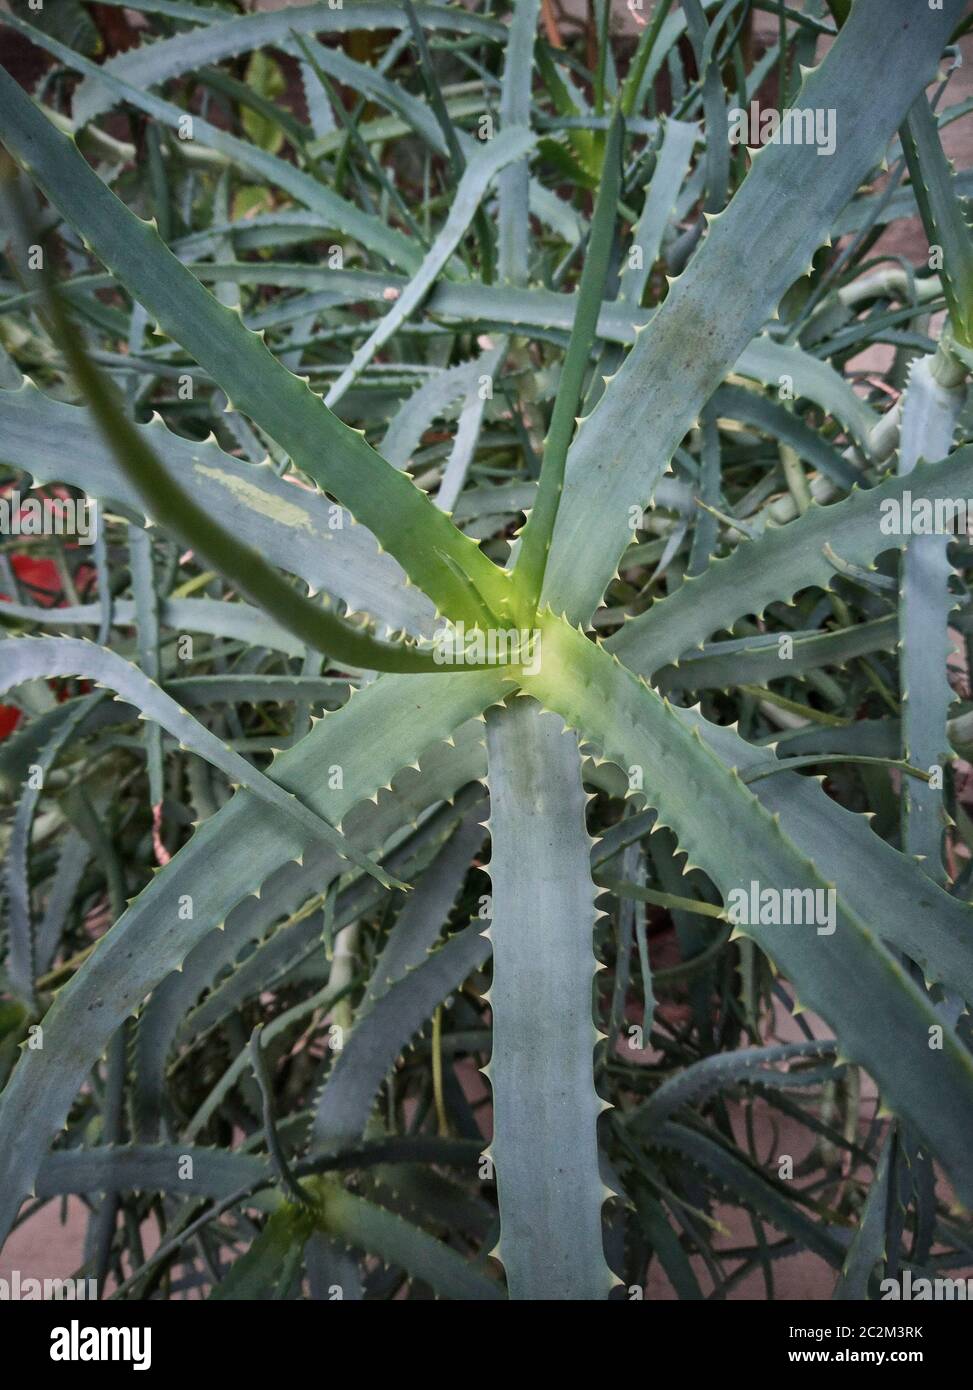 Detail of some parts of the aloe plant: exotic plant used for the care and well-being of man. Stock Photo